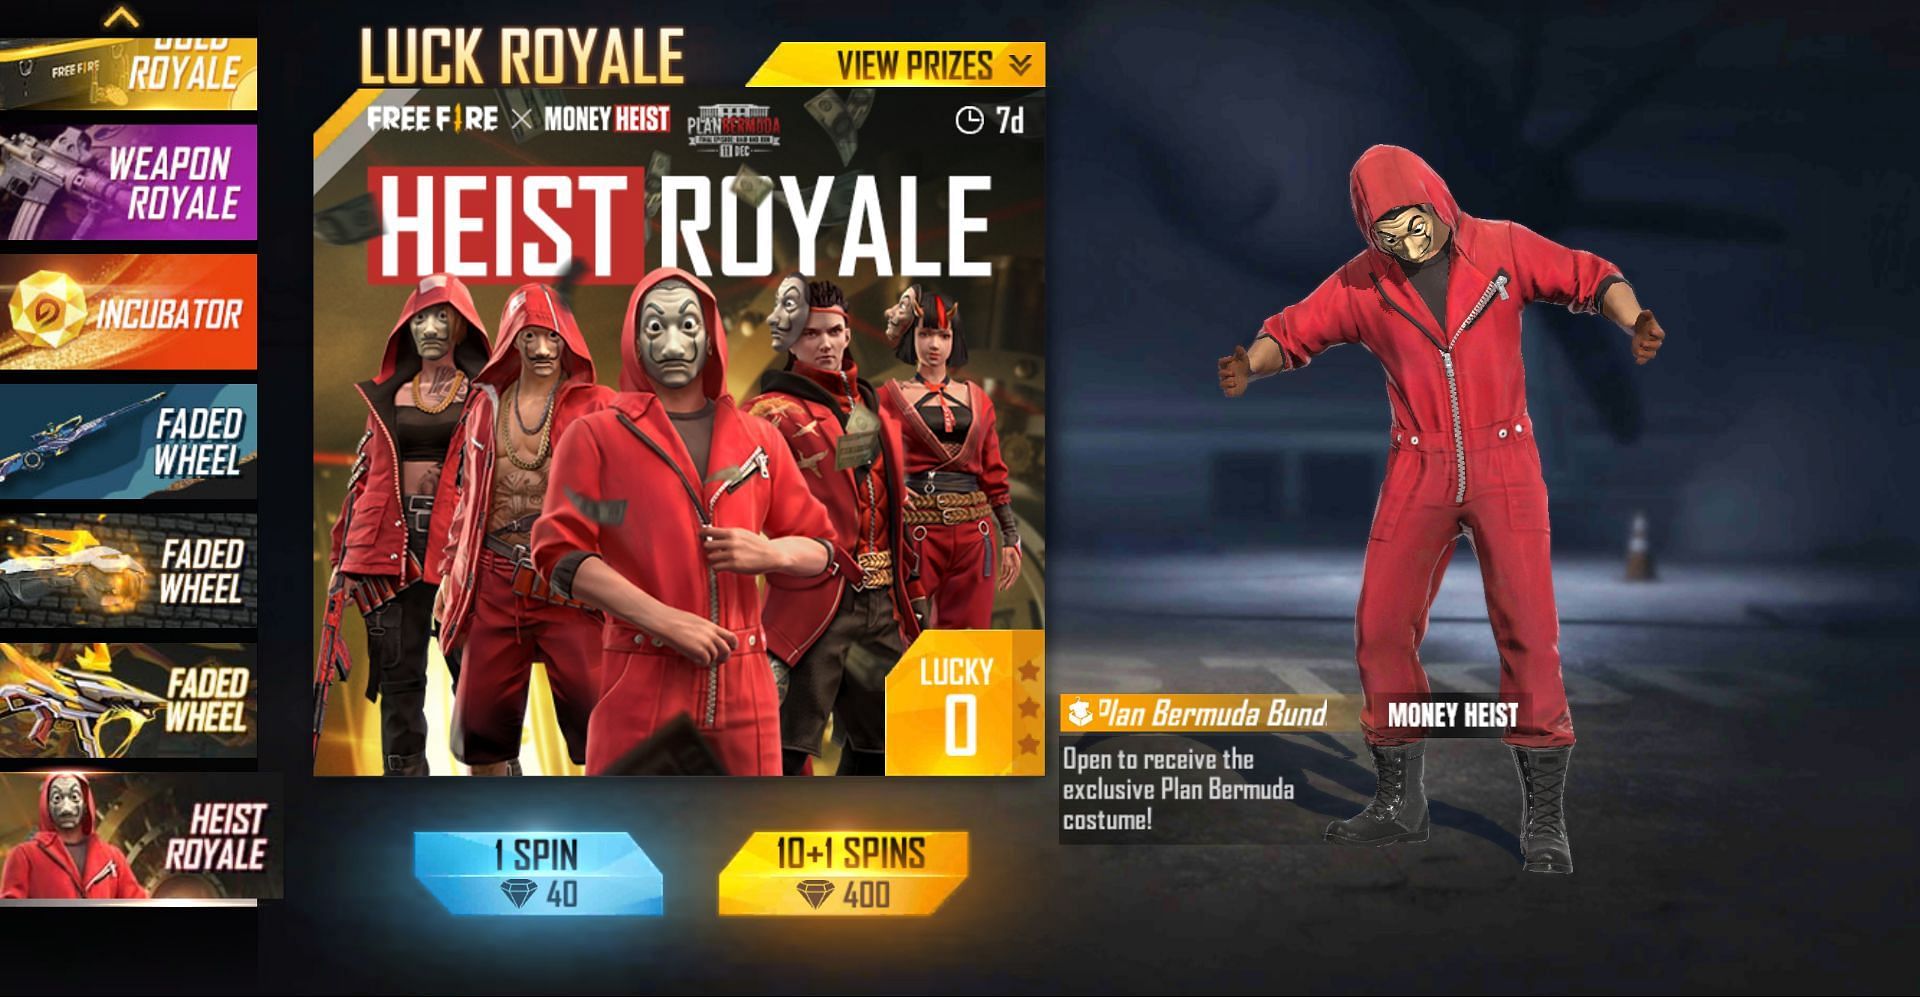 Heist Royale will require 40 diamonds for a single spin (Image via Free Fire)